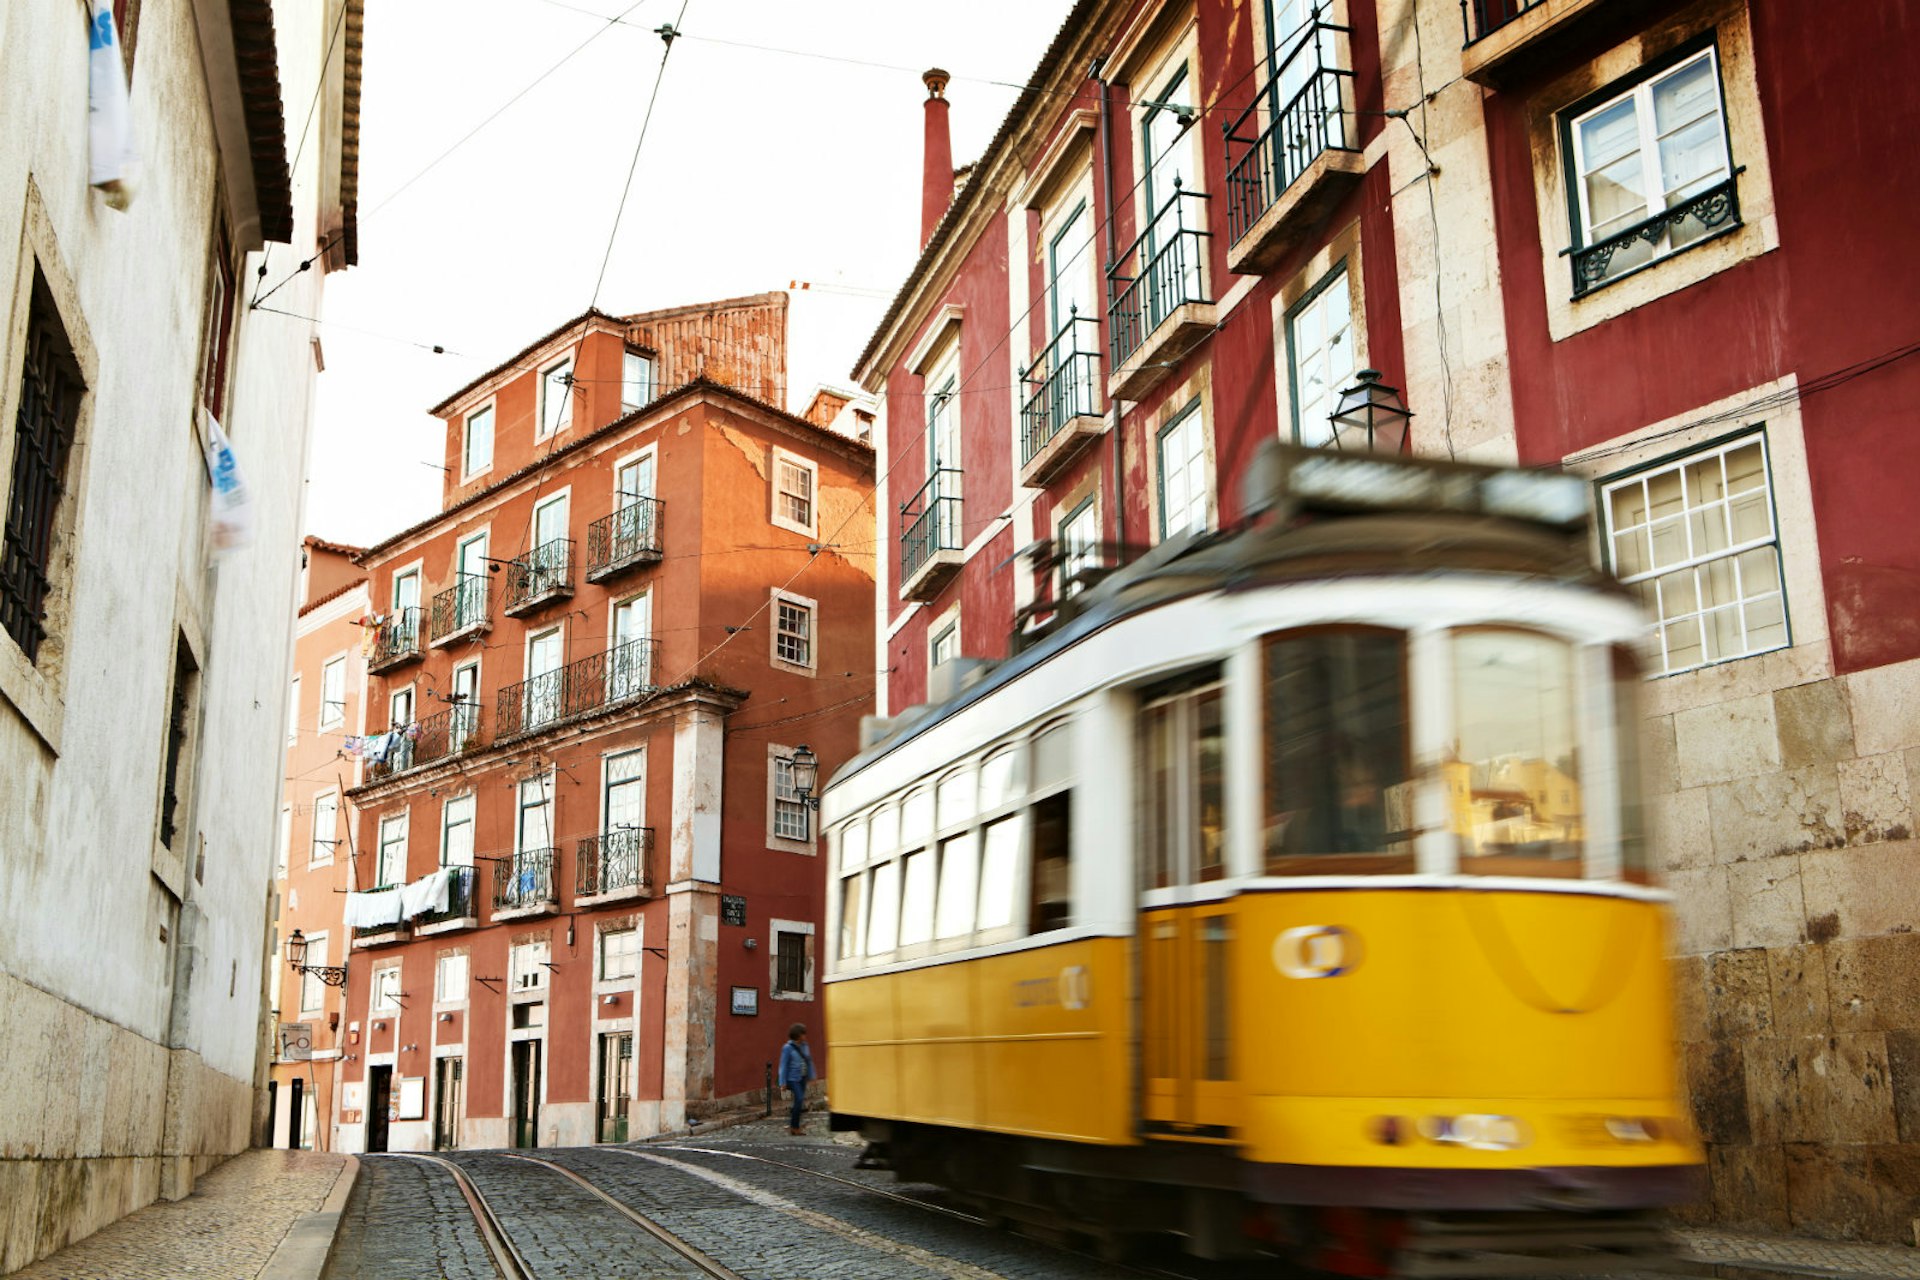 Lisbon's yellow trams are a classic sight in this postcard-perfect city © Matt Munro / Lonely Planet